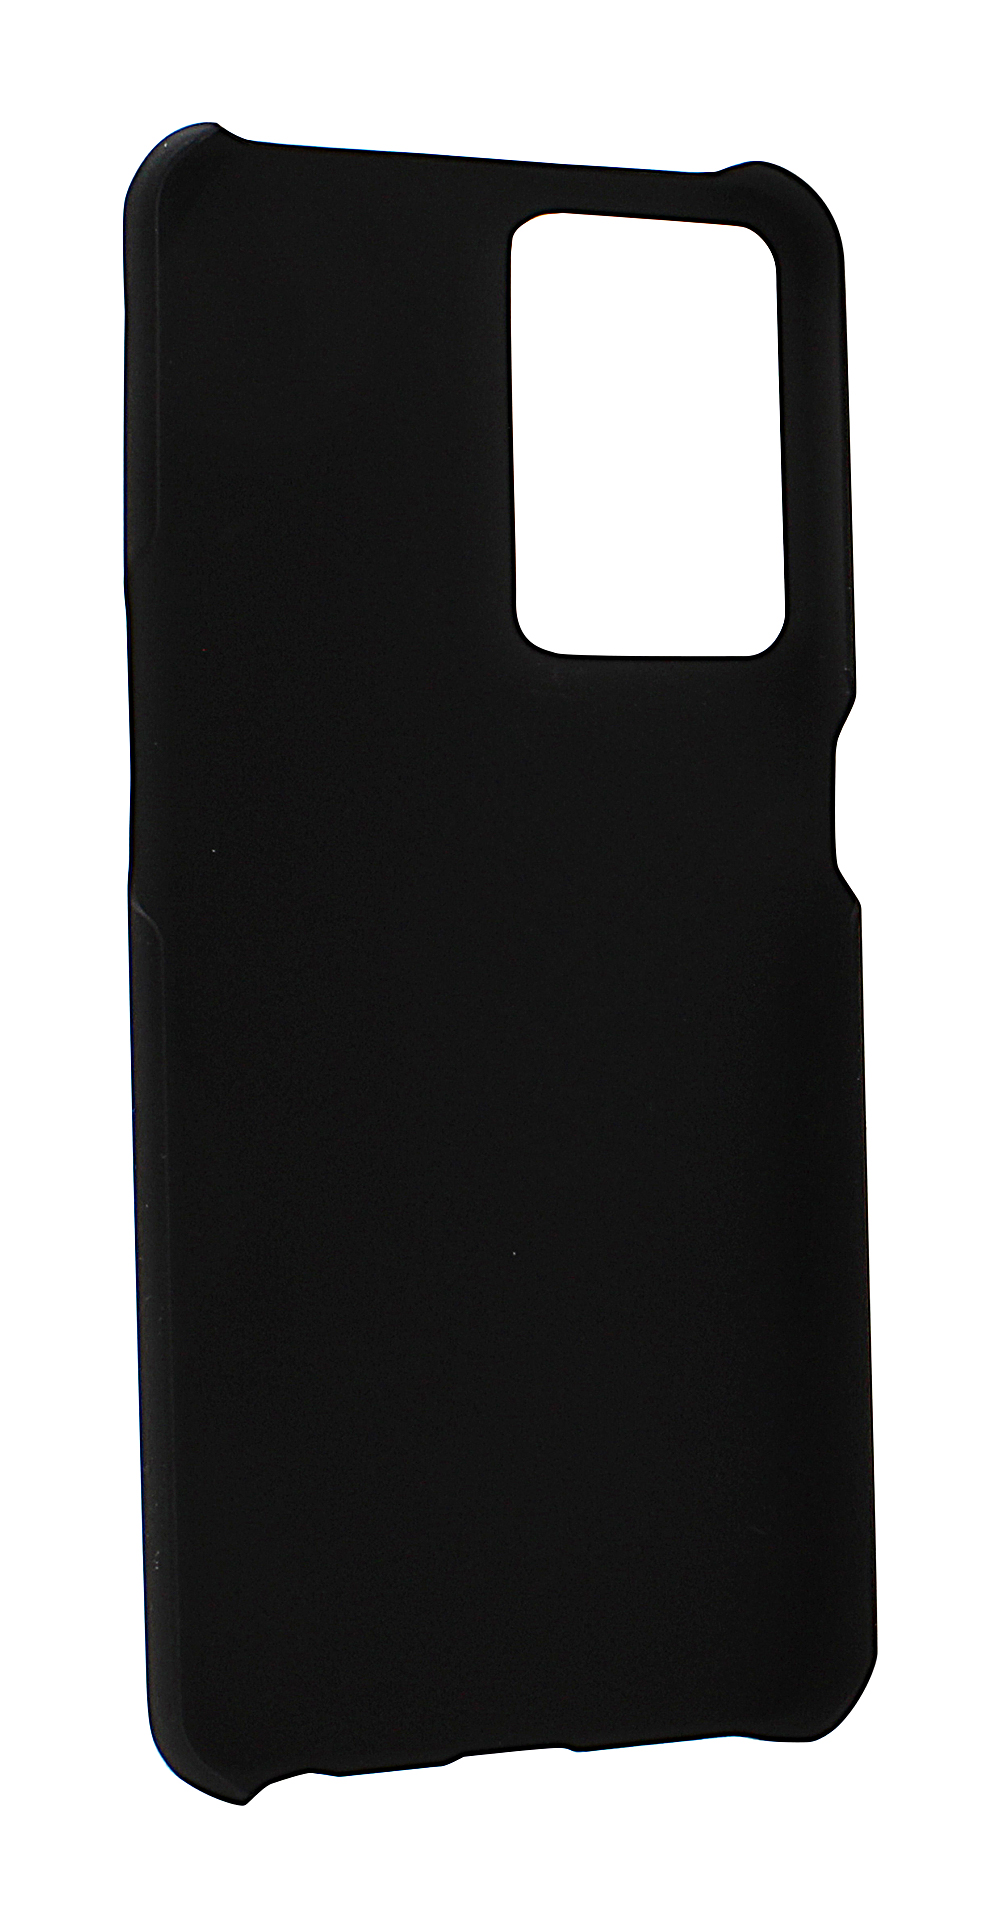 Magnet Cover OnePlus Nord CE 2 5G